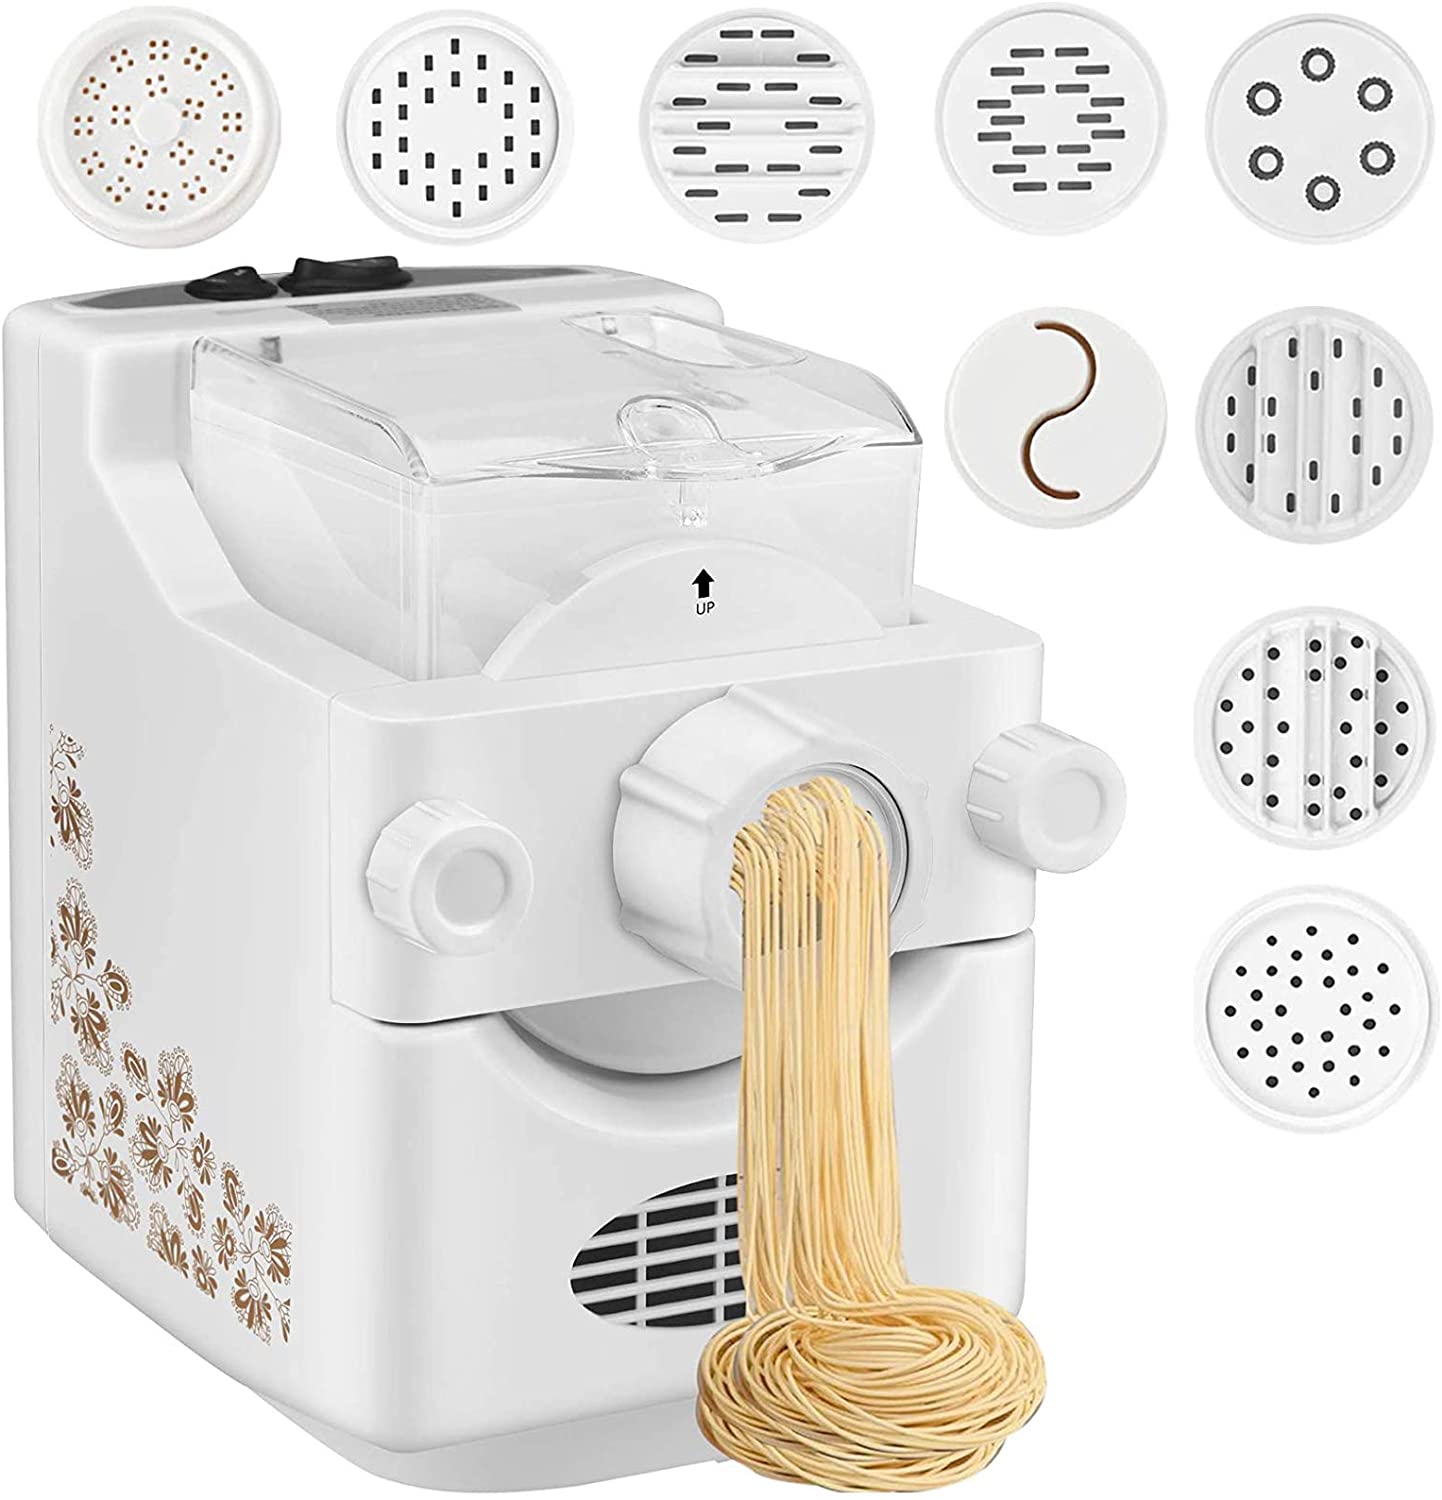 Electric Pasta and Ramen Noodle Maker Machine with 9 Multi-Functional  Shapes, Make 1 Pound of Homemade Noodles For Making Spaghetti, Fettuccine,  Penne, Macaroni – Soulives LLC